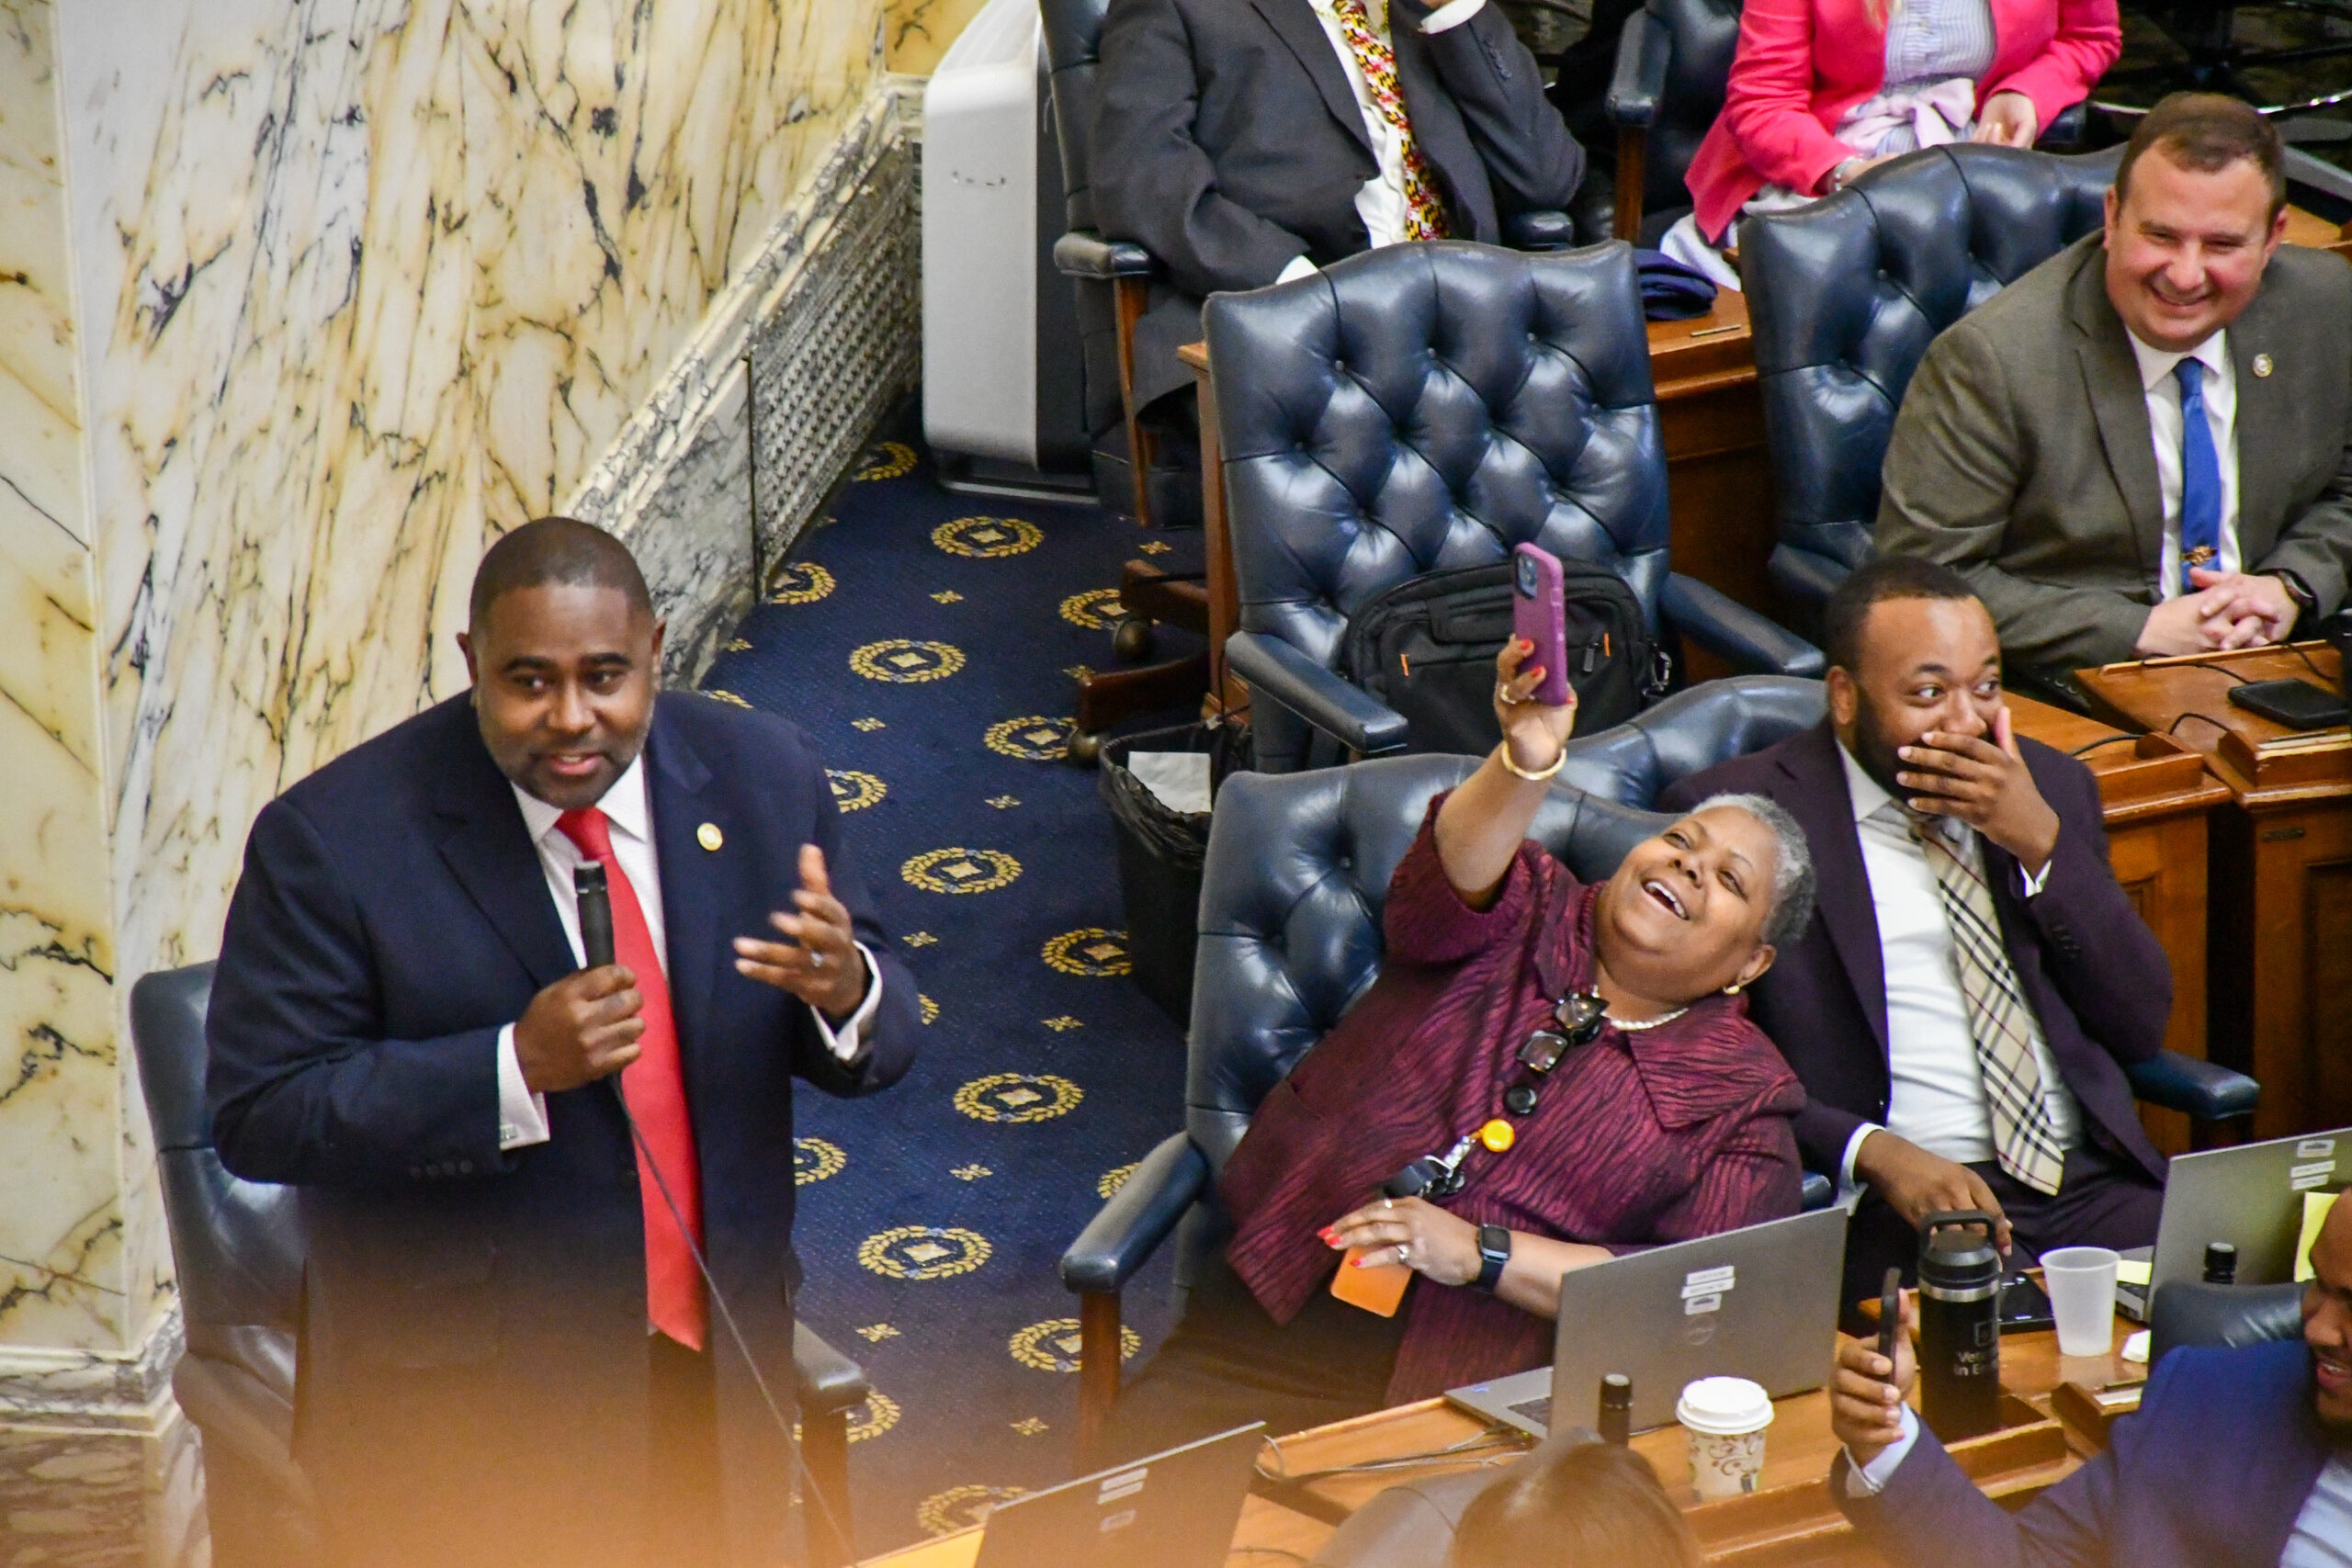 Del. Darryl Barnes, D-Prince George’s, cracks jokes during his farewell address, eliciting laughs from his colleagues. (Christine Zhu/Capital News Service)